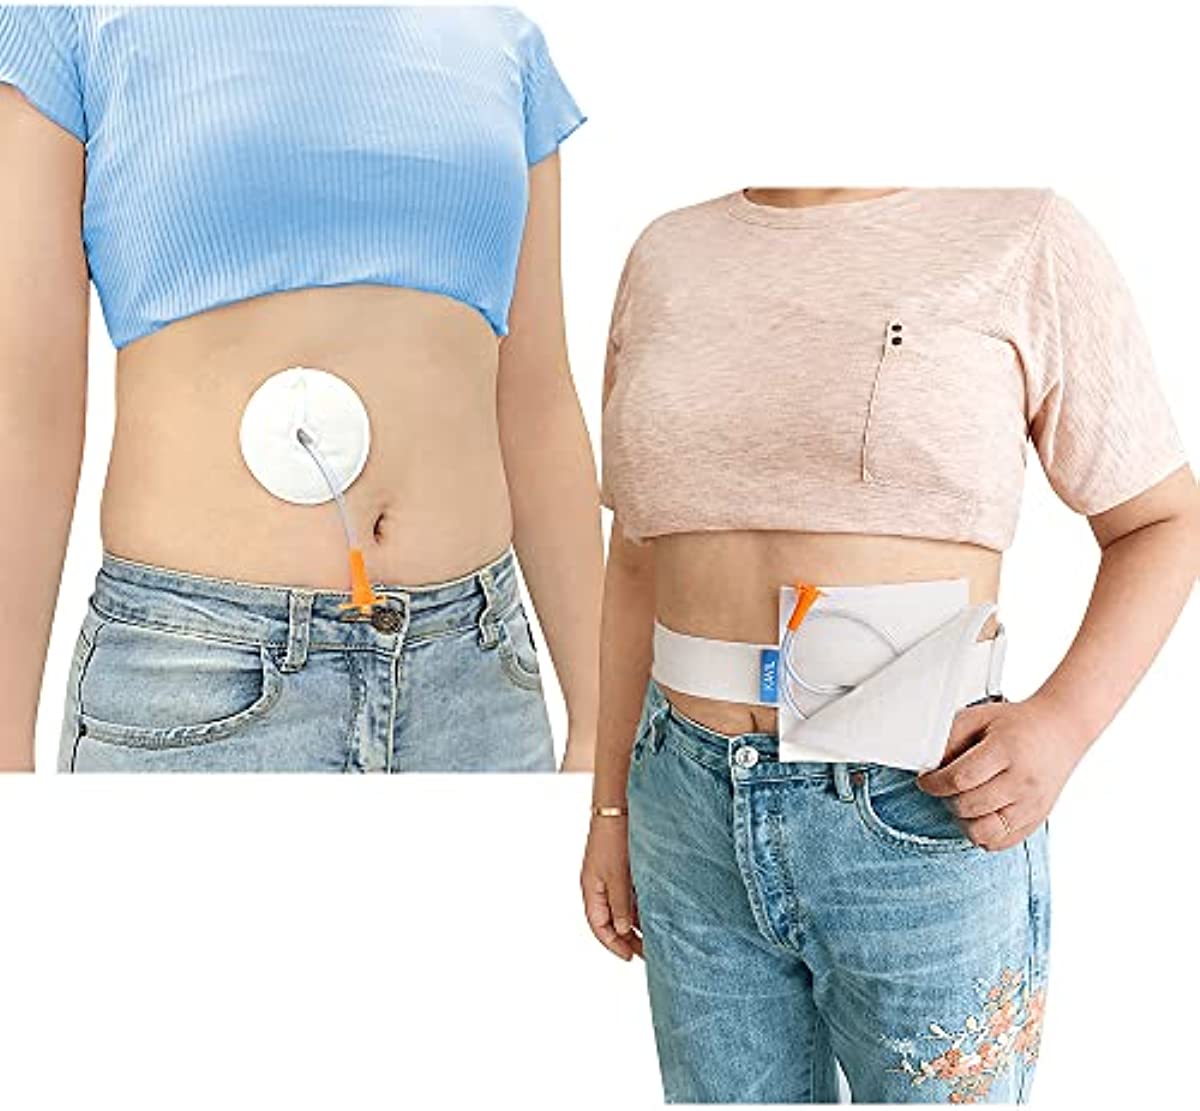 Gtube Button Covers (12 Pcs) and Feeding Tube Belt (1 Pcs) Supplies Peritoneal Dialysis Accessories G Tube Pads Pd Peg Tube Holder Ostomy Accessories